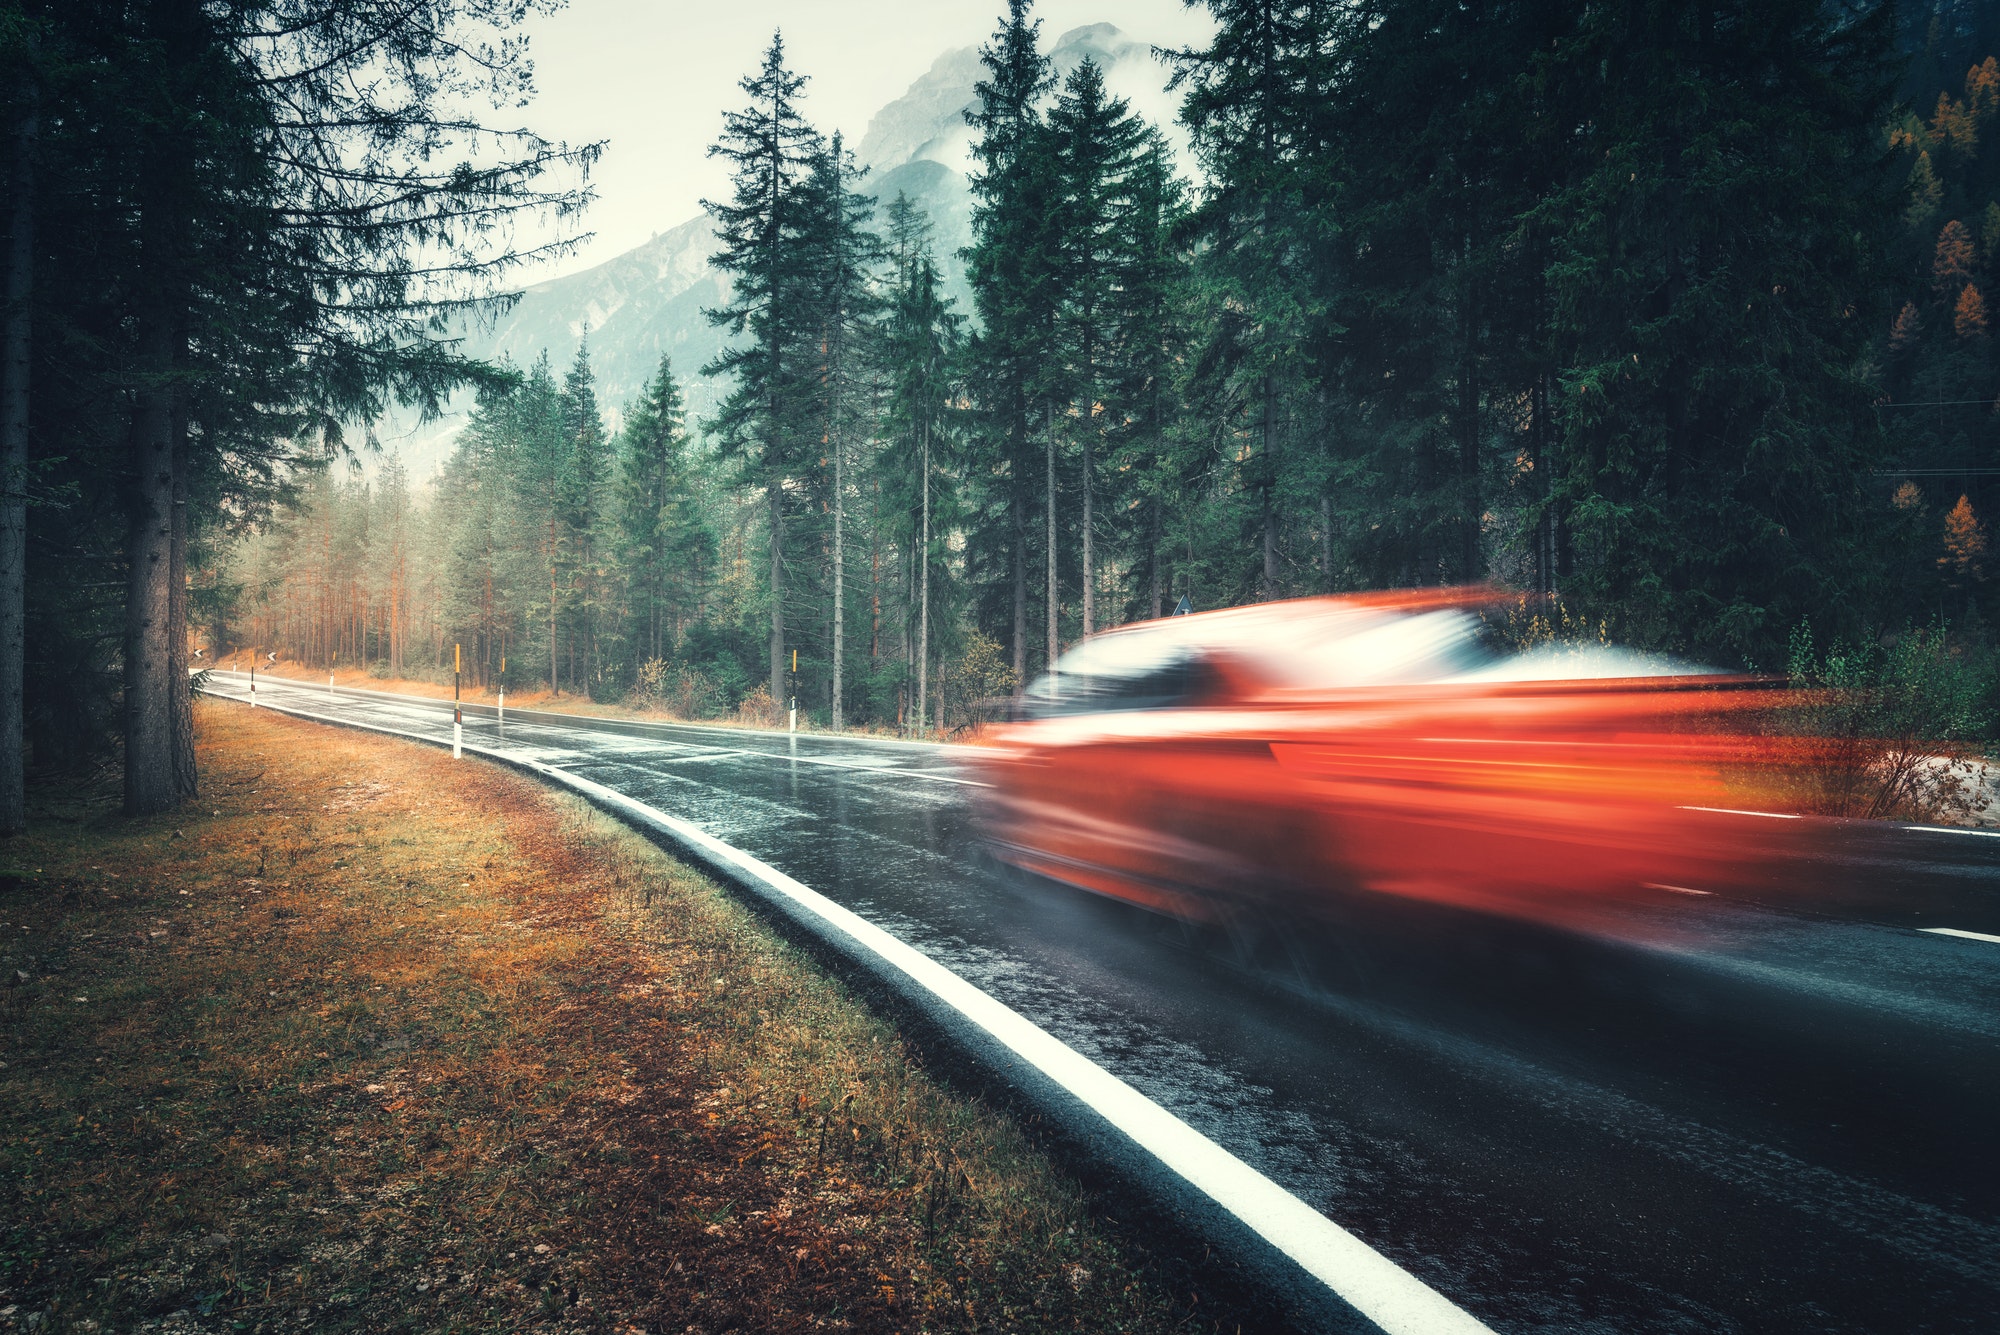 Blurred red car in motion on the road in autumn forest